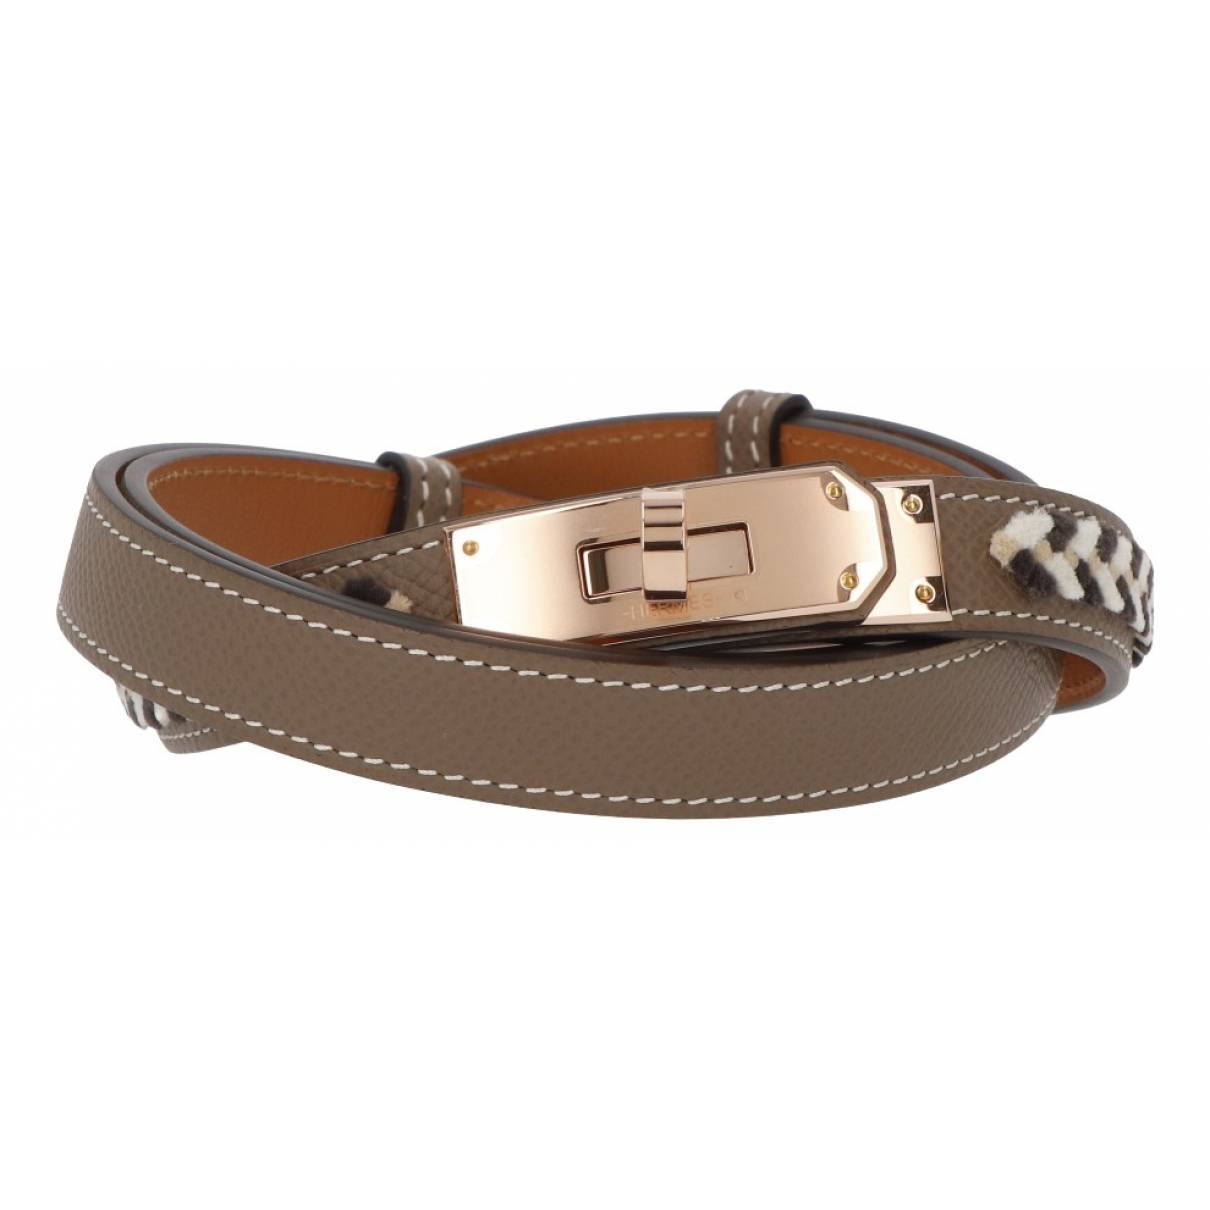 Kelly leather belt Hermès Grey size 37 Inches in Leather - 32031431